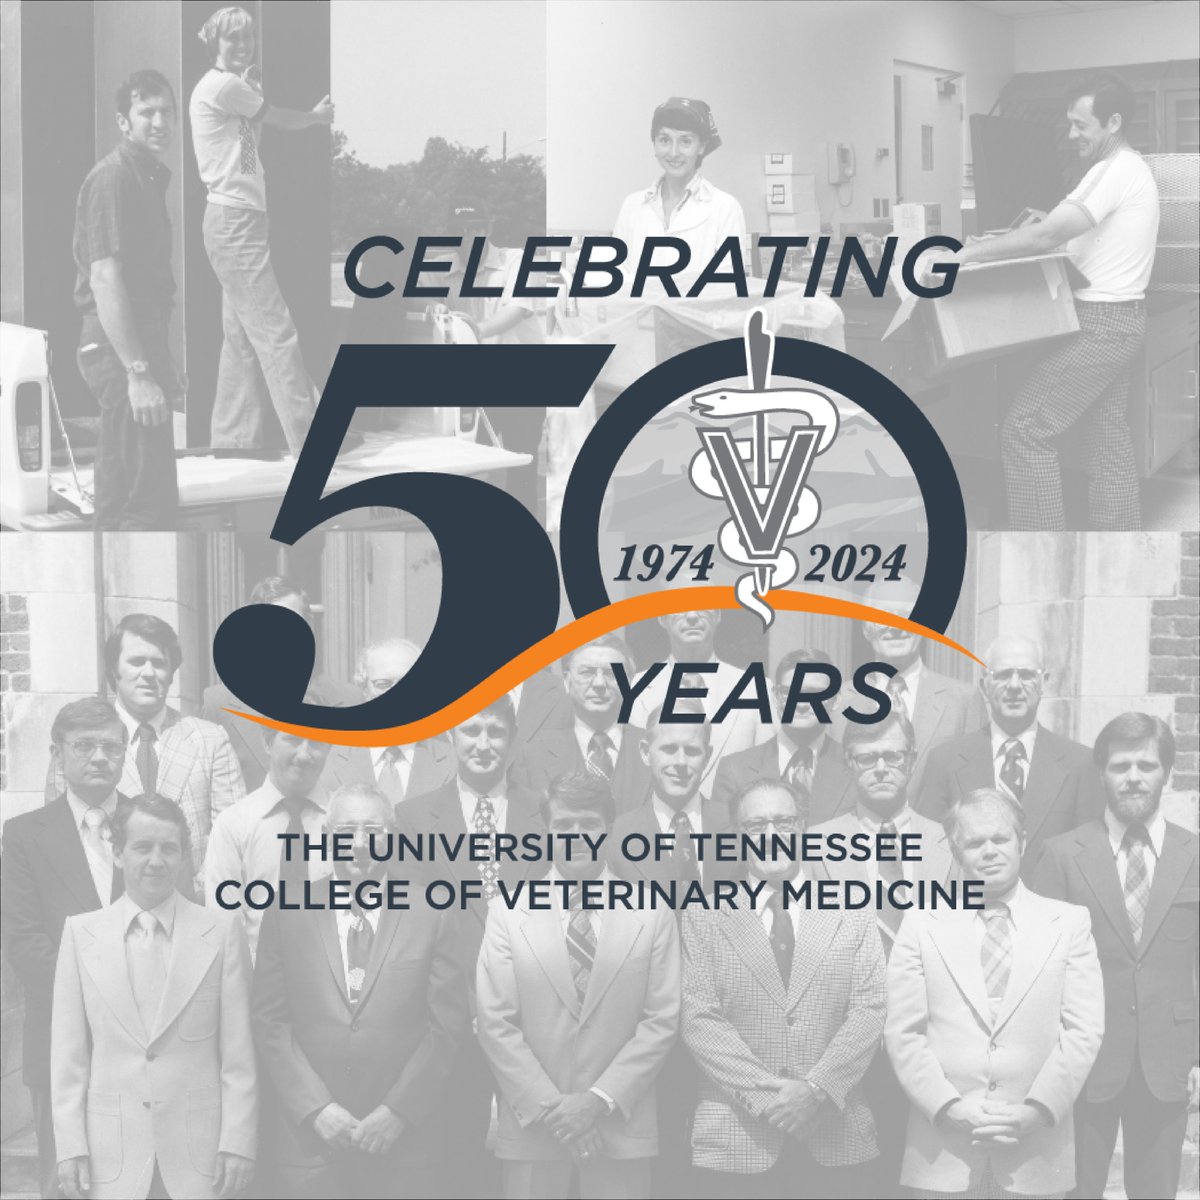 Today marks a special milestone as we commemorate 50 years of excellence at the UT College of Veterinary Medicine! 🎉🐾 Discover the legacy of UTCVM and its vital role in advancing animal, human, and environmental health at vetmed.tennessee.edu/50th-anniversa….